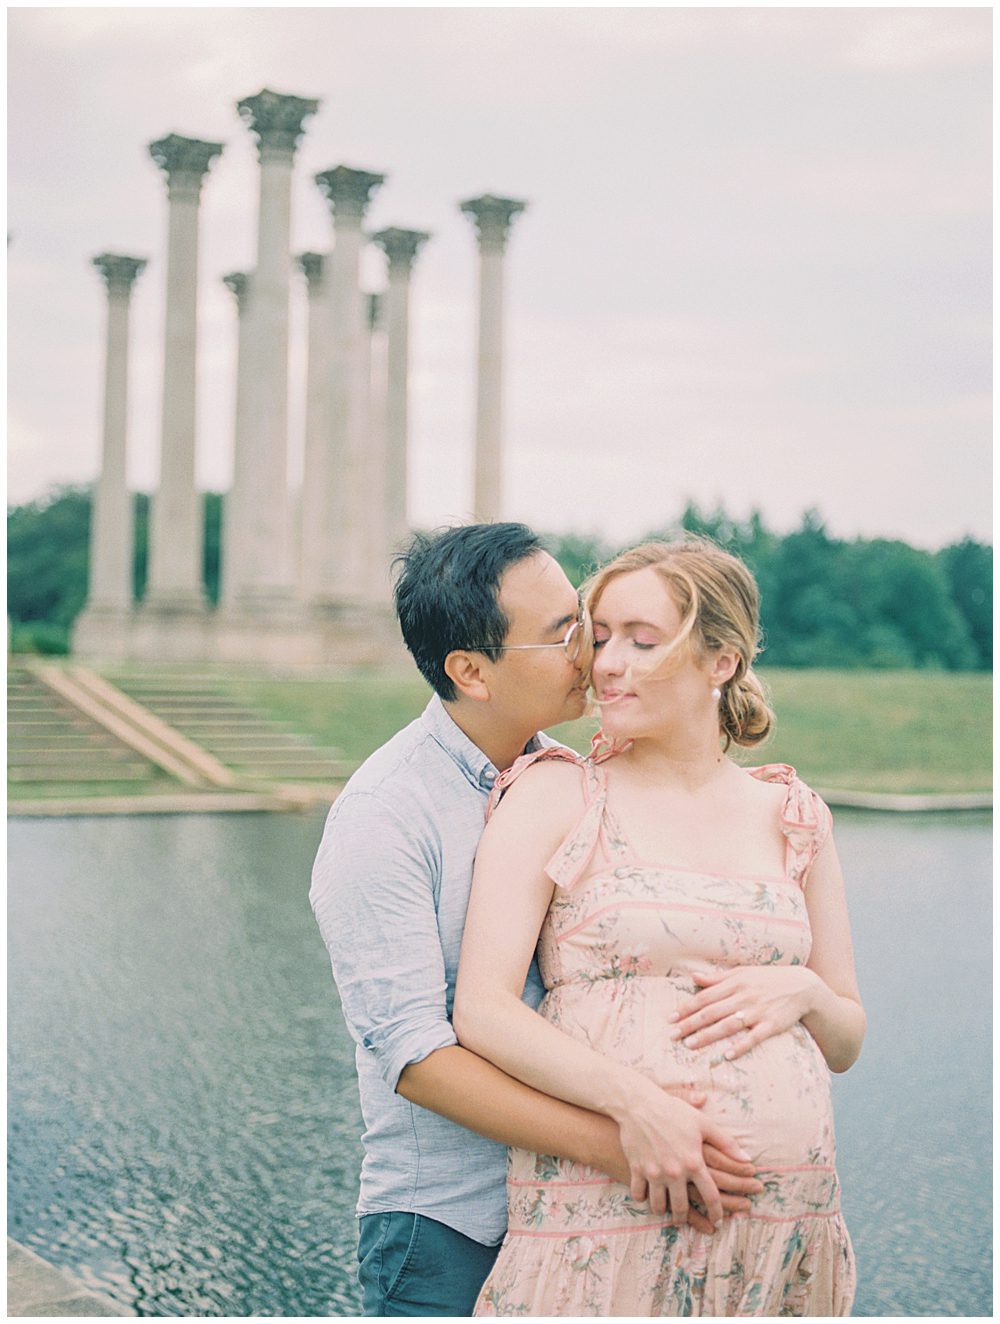 Husband leans into his wife's cheek during their National Arboretum maternity session.